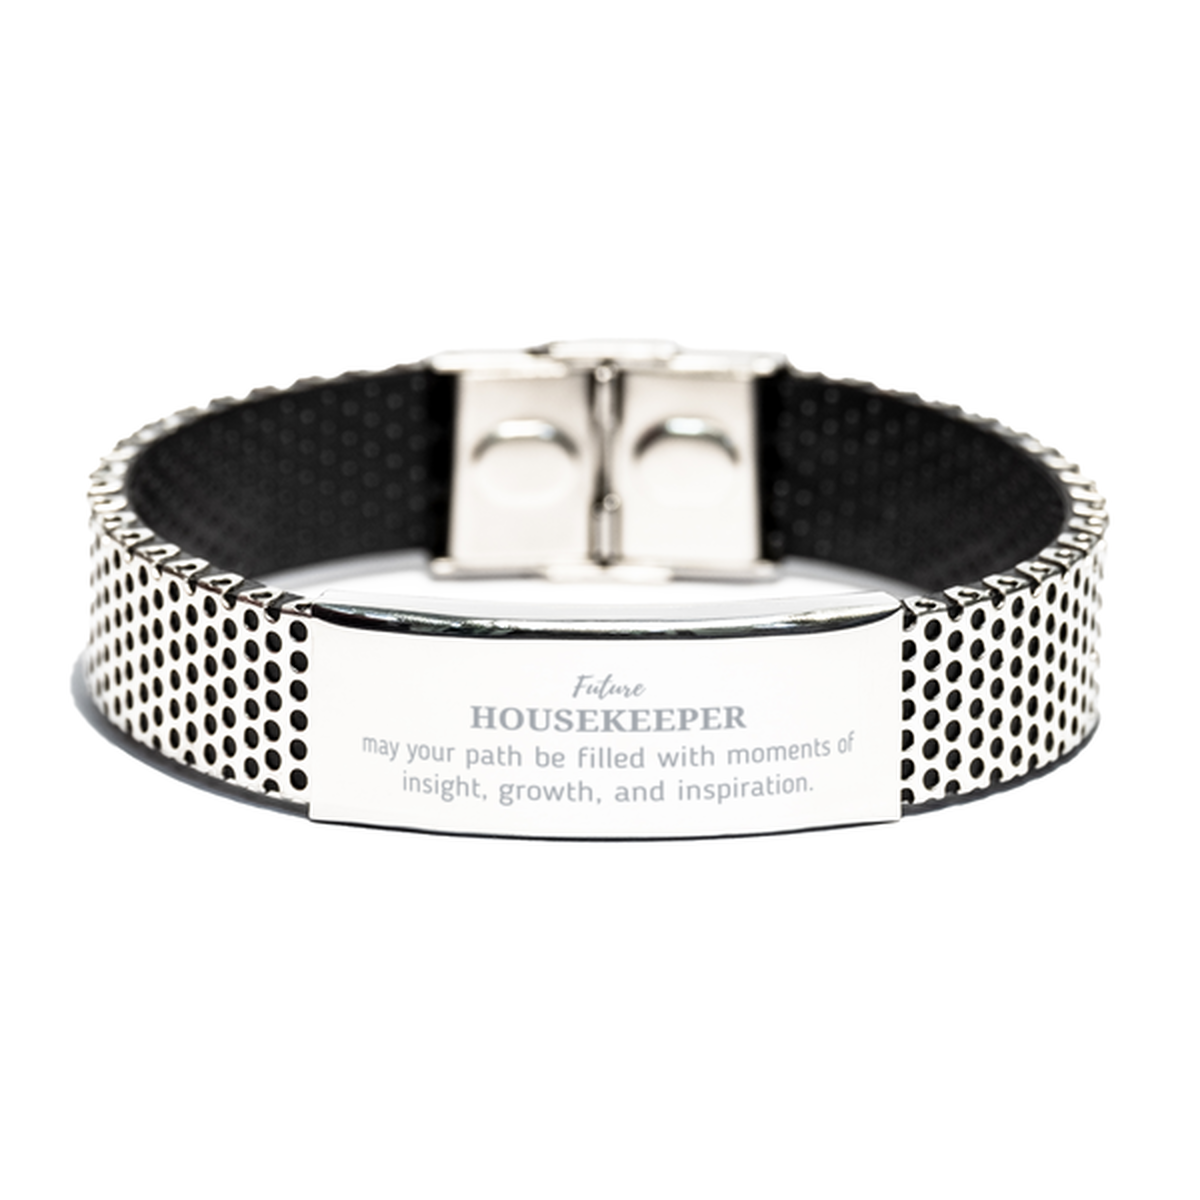 Future Housekeeper Gifts, May your path be filled with moments of insight, Graduation Gifts for New Housekeeper, Christmas Unique Stainless Steel Bracelet For Men, Women, Friends